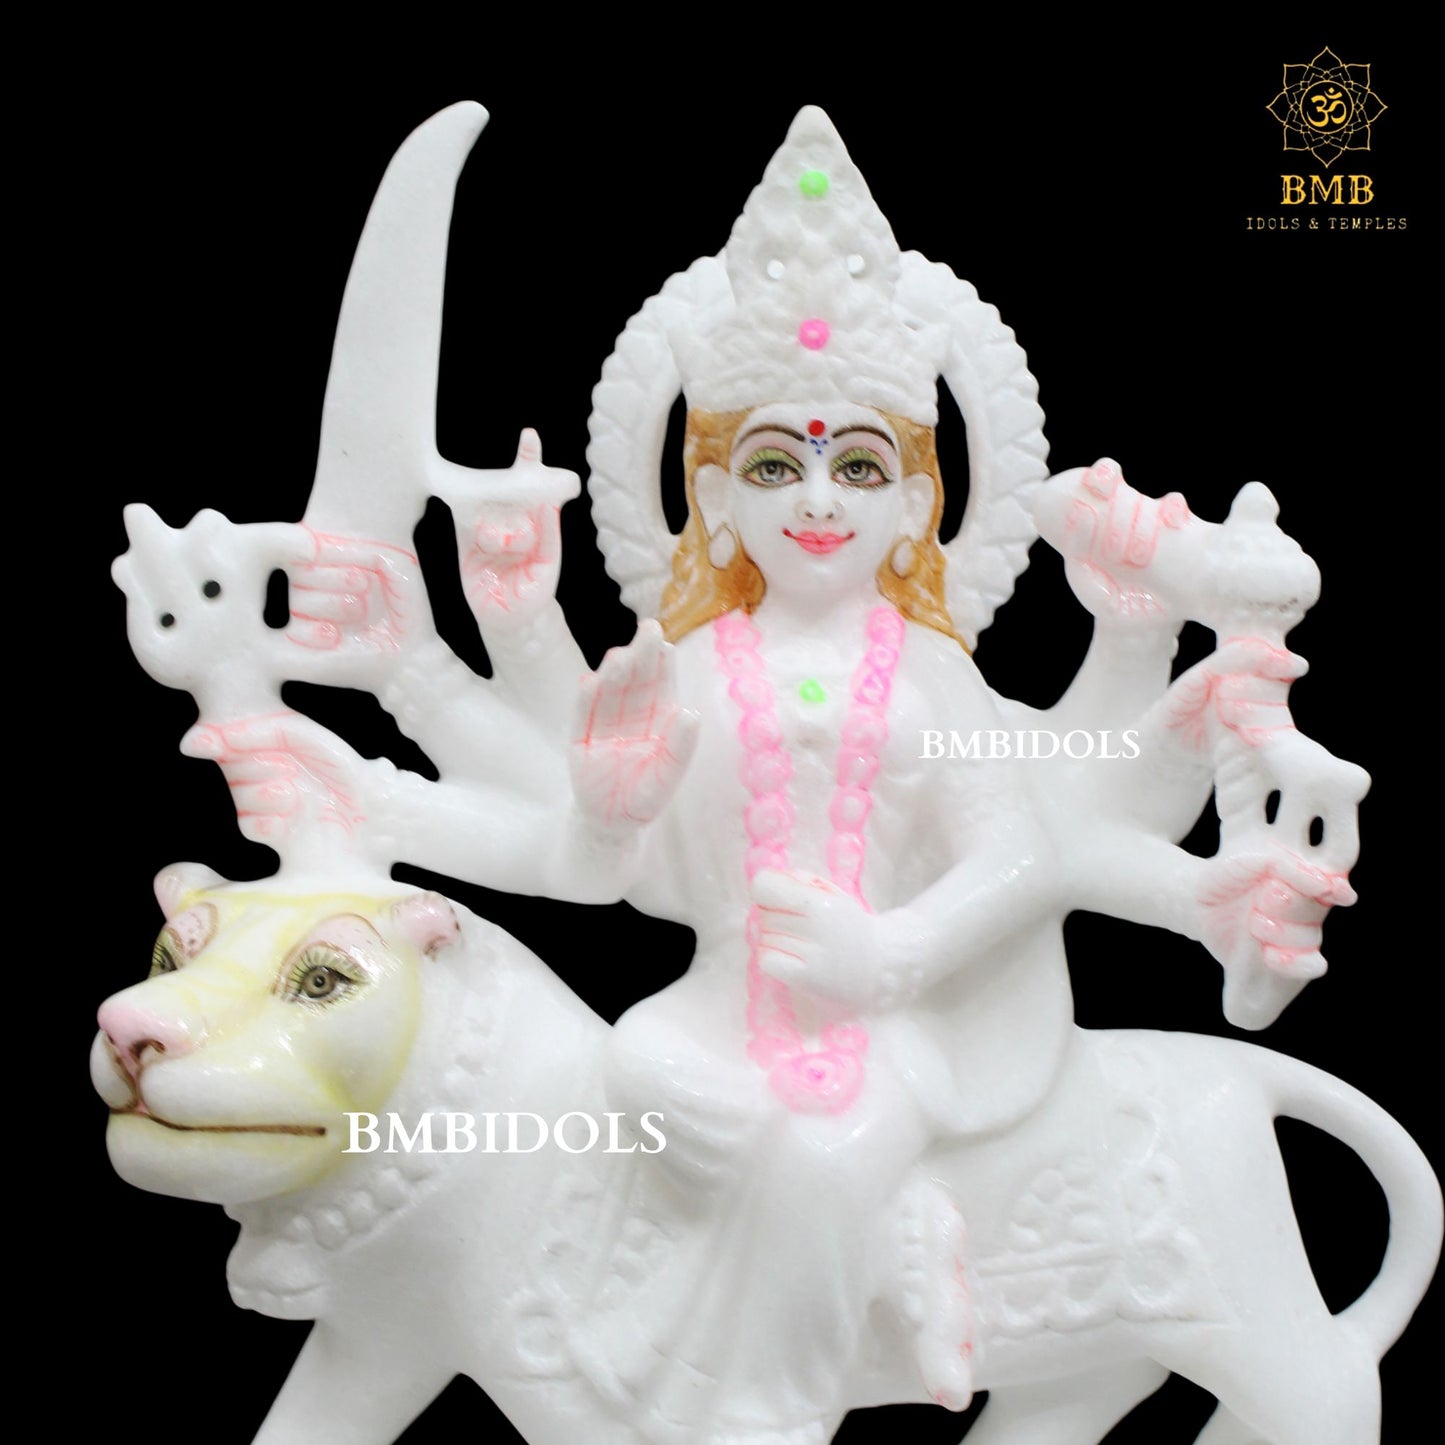 Marble Ambe Maa Murti made in Makrana Marble in 10inches